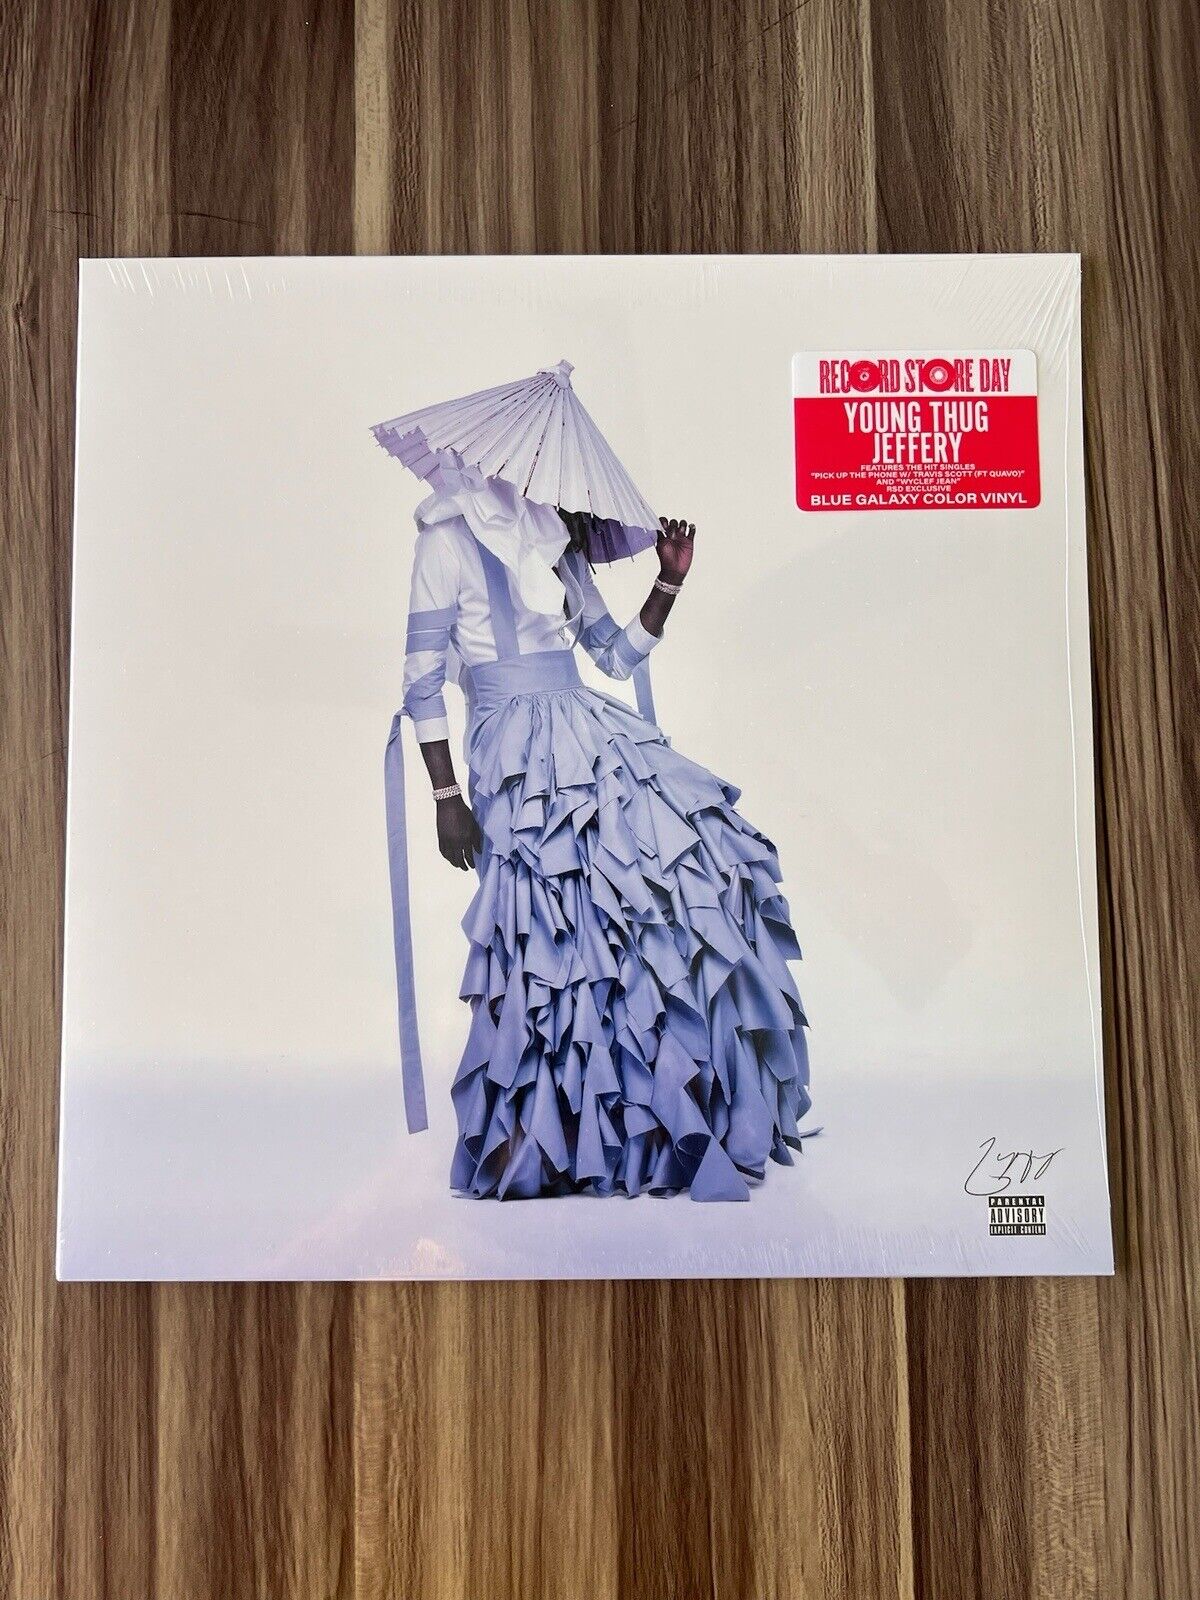 Jeffery Young Thug RSD 2024 Galaxy Vinyl Record Store Day LE SAME DAY SHIP